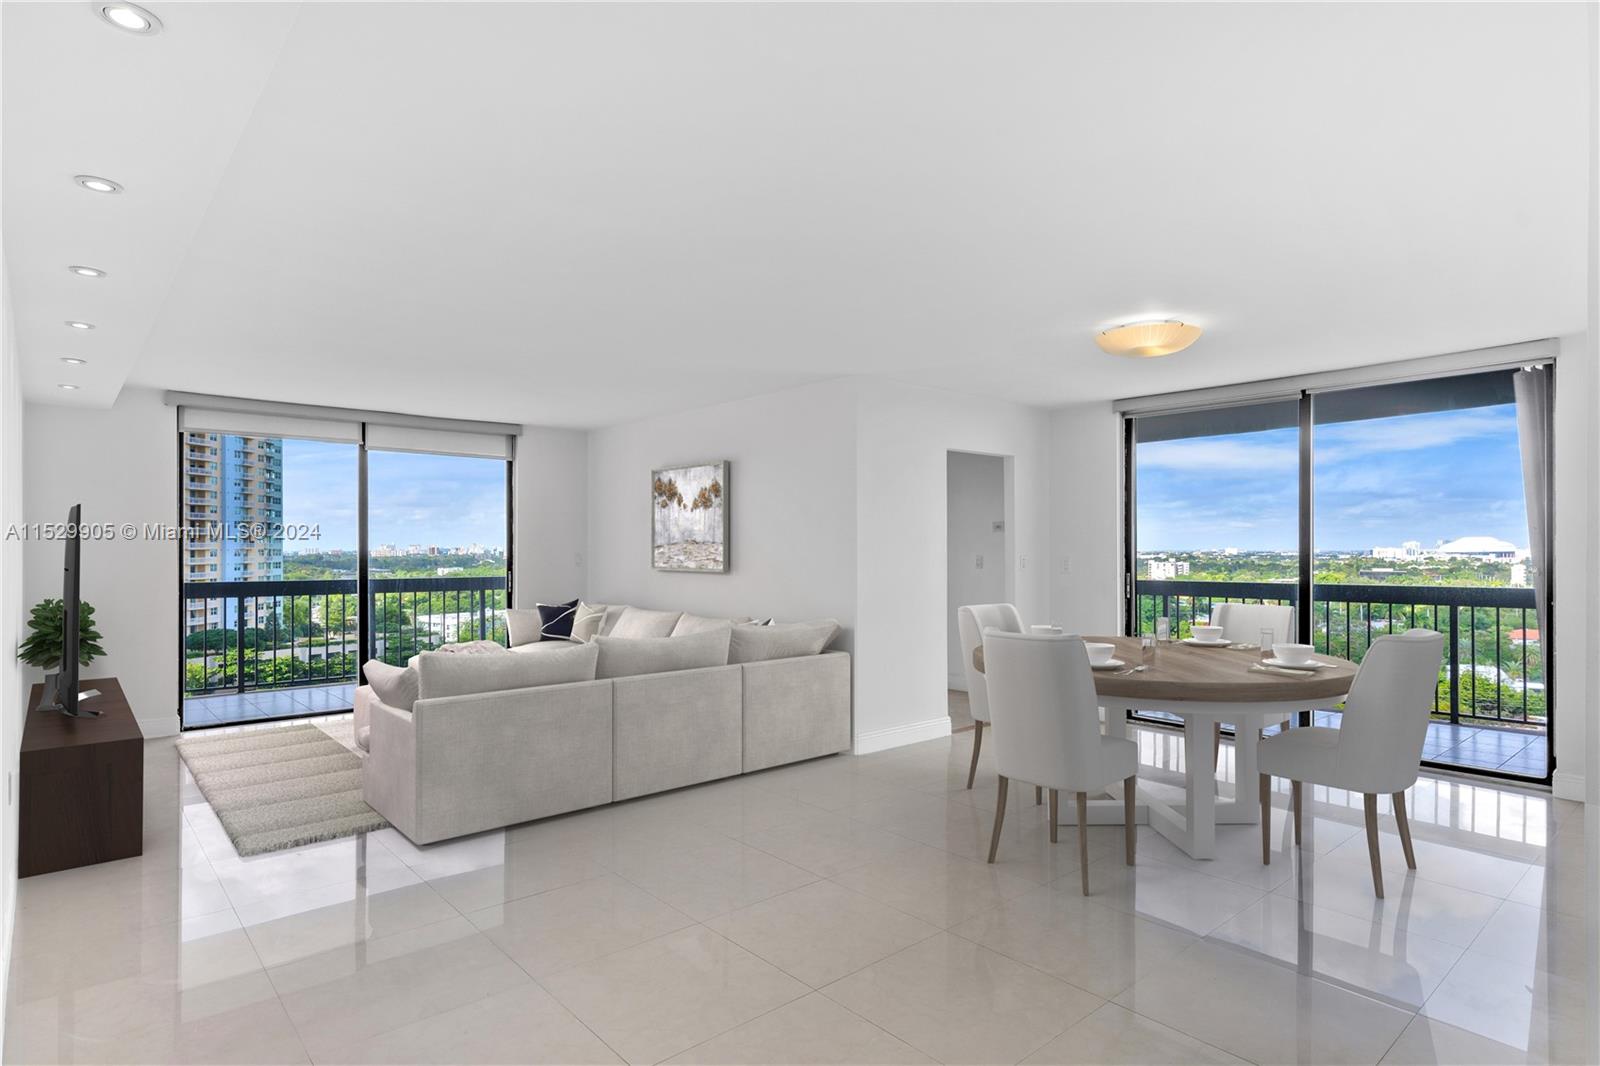 Beautiful 2 bed 2 bath Brickell waterfront condo with wrap-around balcony and amazing panoramic views. Seize the rare opportunity to own this exceptional 1,460 sqft corner unit. Recently remodeled, porcelain tiles, granite countertops, stainless steel appliances, walk-in showers, 2 spacious walk-in closets and laundry room. Experience resort-style living with 24-hour gated security, concierge, valet services, and an array of amenities: 5 tennis courts, 3 racquetball courts, heated olympic pool and BBQ area overlooking the bay, fitness center, steam & sauna, game room, convenience store and more. Nestled in South Brickell, this prime location avoids the hustle and bustle of traffic while keeping you close to the vibrant city life, a perfect blend of tranquility and urban living.